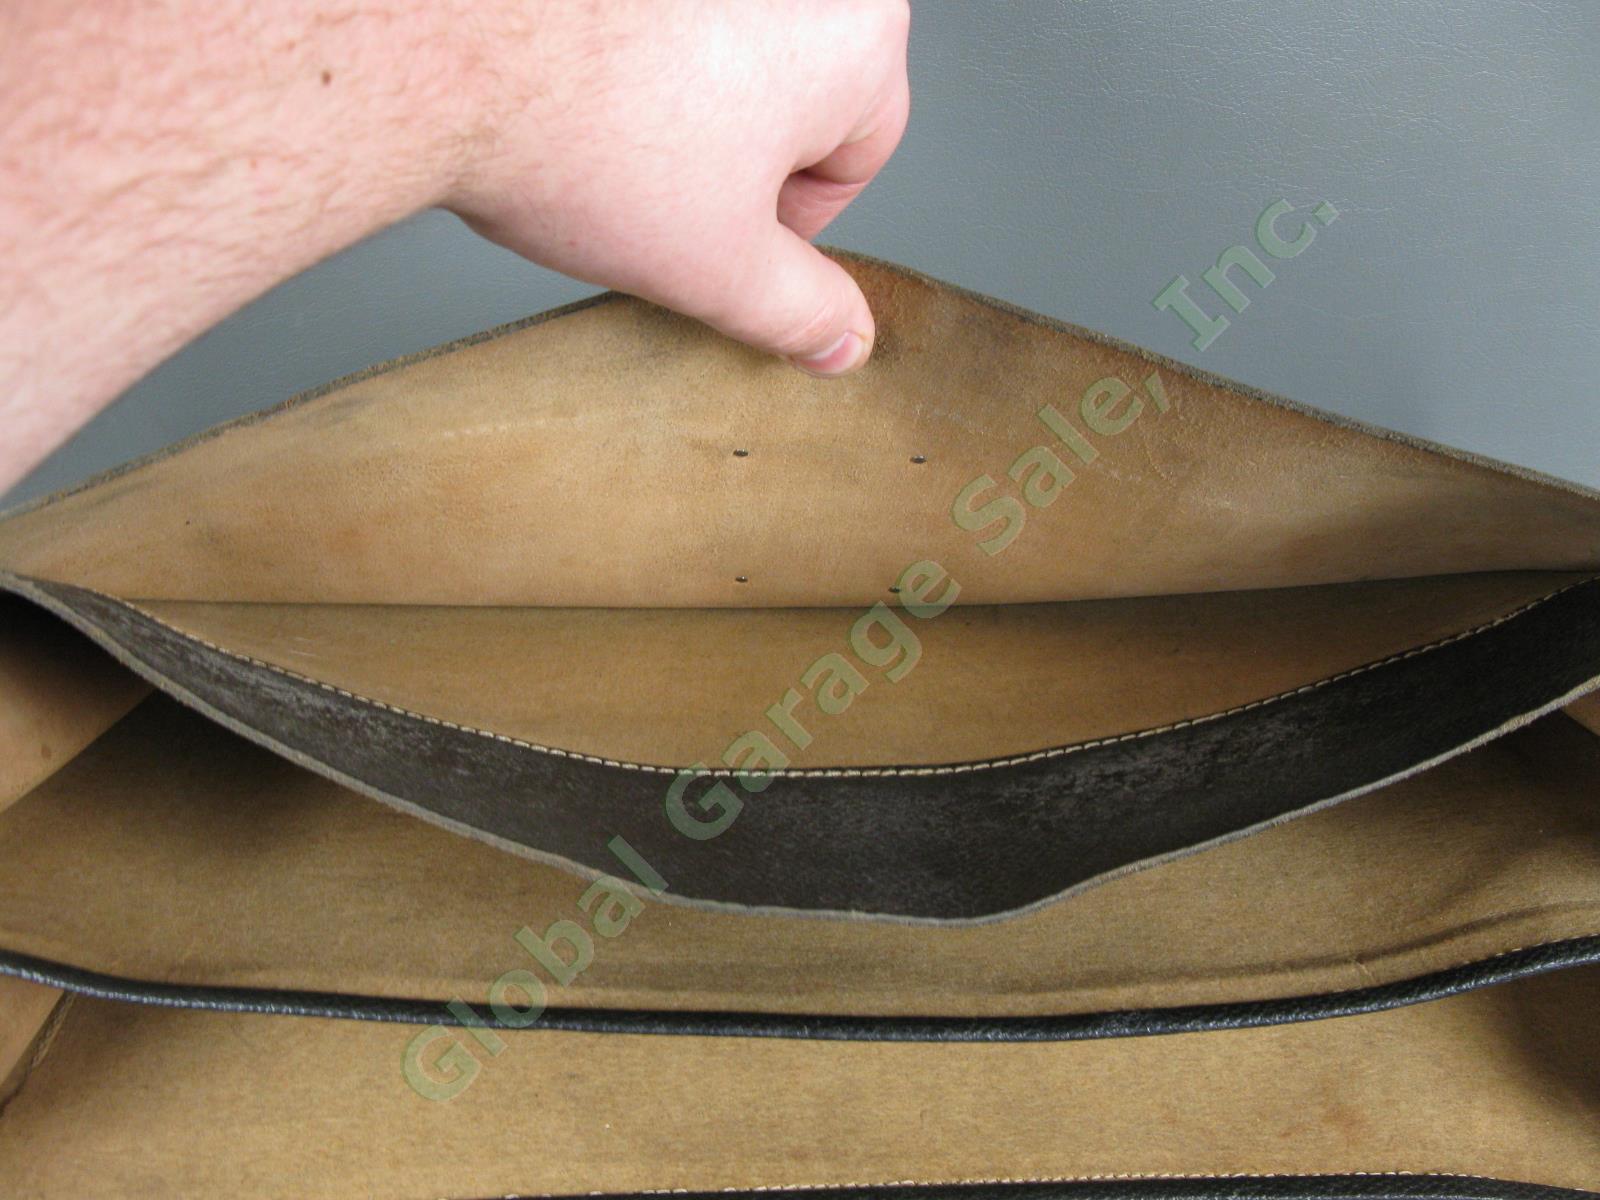 Original WWII US Army Captain Type-1 Navigator Leather Gusset Briefcase Bag NR 8